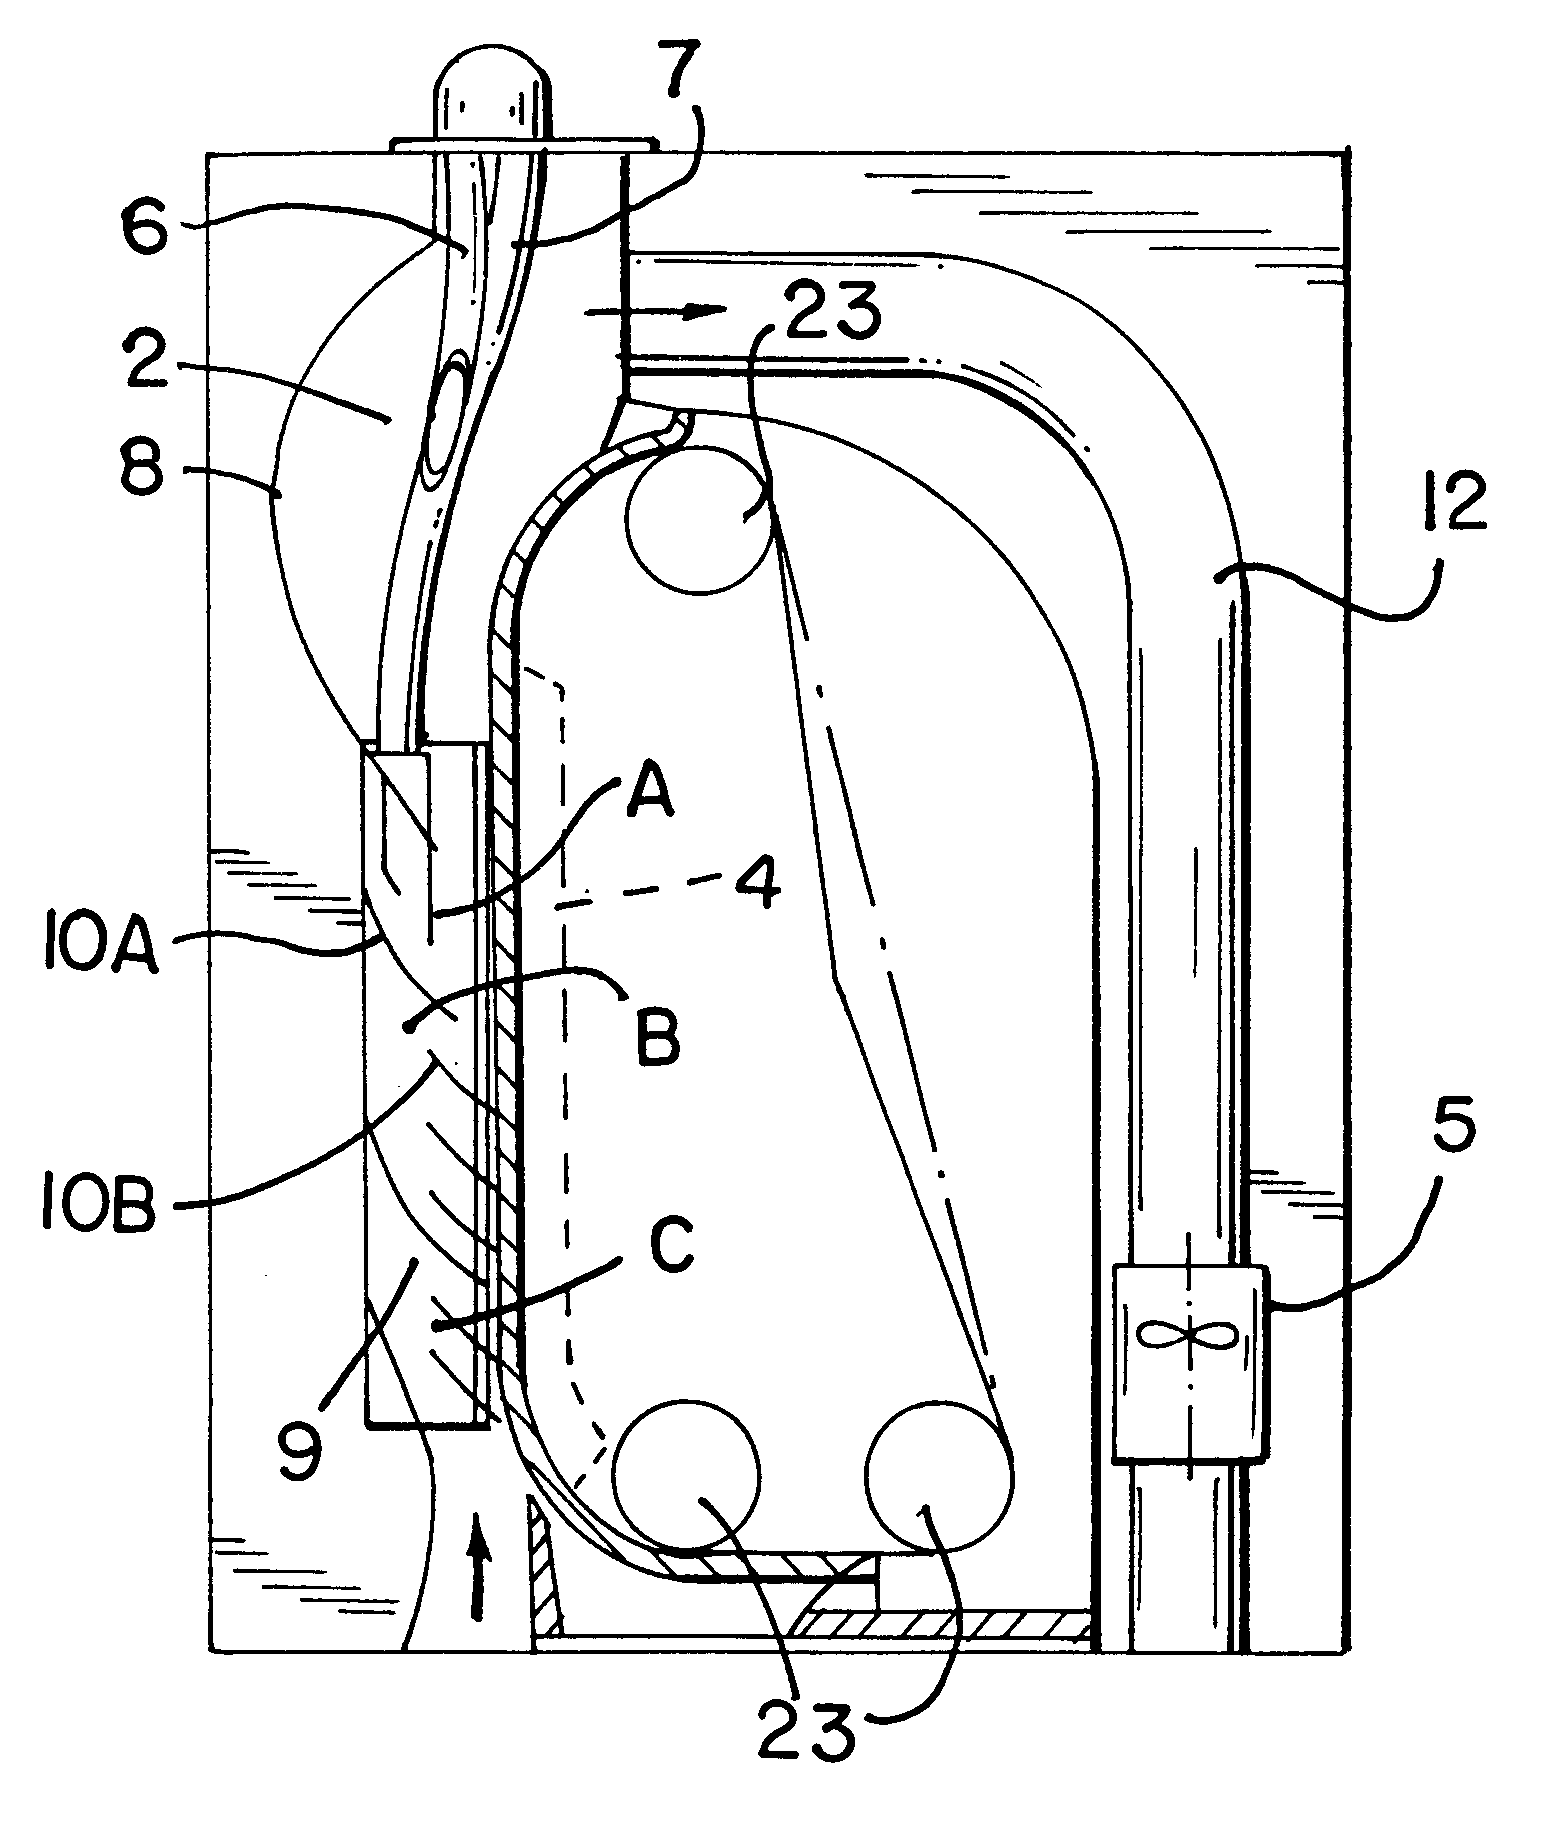 Magnetic decontamination device and method